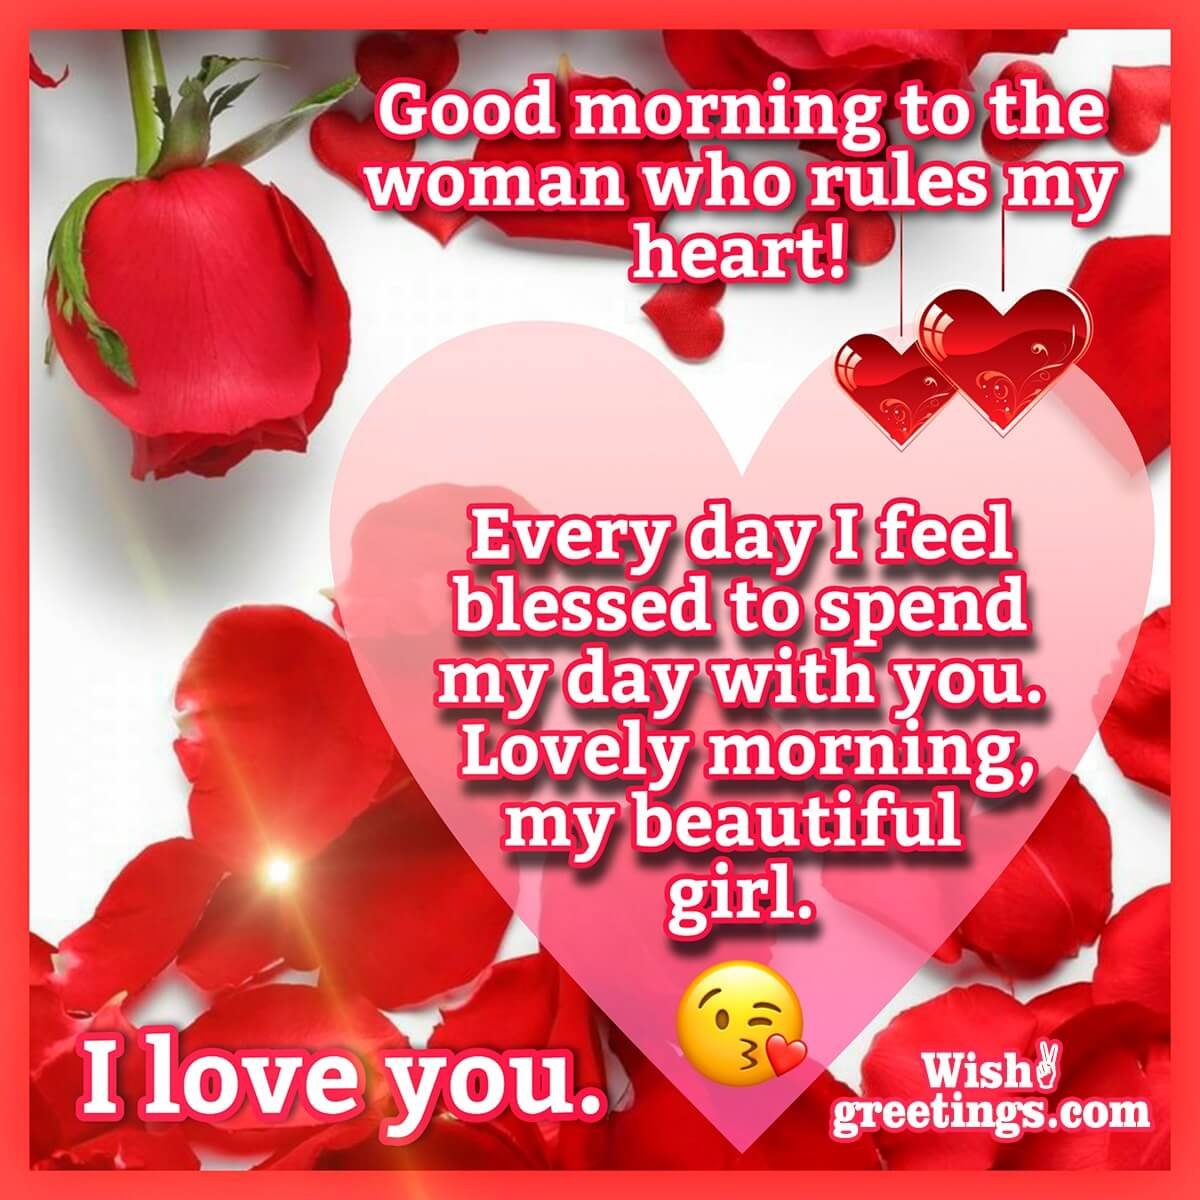 Good Morning Wishes for Wife - Wish Greetings